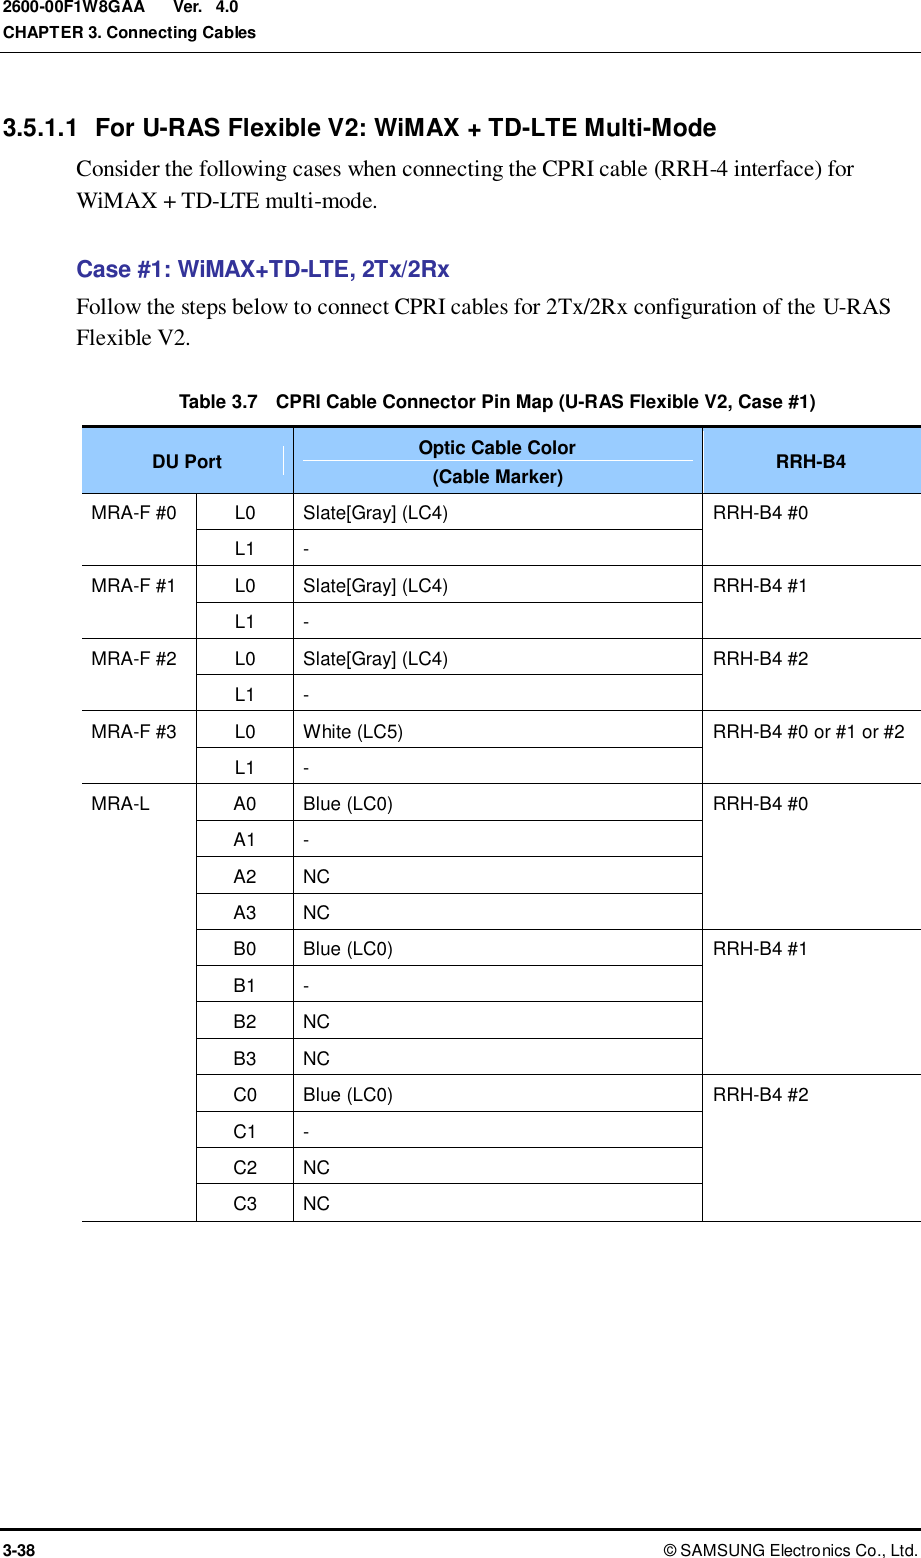  Ver.  CHAPTER 3. Connecting Cables 3-38 ©  SAMSUNG Electronics Co., Ltd. 2600-00F1W8GAA 4.0 3.5.1.1  For U-RAS Flexible V2: WiMAX + TD-LTE Multi-Mode Consider the following cases when connecting the CPRI cable (RRH-4 interface) for WiMAX + TD-LTE multi-mode.    Case #1: WiMAX+TD-LTE, 2Tx/2Rx Follow the steps below to connect CPRI cables for 2Tx/2Rx configuration of the U-RAS Flexible V2.  Table 3.7    CPRI Cable Connector Pin Map (U-RAS Flexible V2, Case #1) DU Port Optic Cable Color (Cable Marker) RRH-B4 MRA-F #0 L0 Slate[Gray] (LC4) RRH-B4 #0 L1 - MRA-F #1 L0 Slate[Gray] (LC4) RRH-B4 #1 L1 - MRA-F #2 L0 Slate[Gray] (LC4) RRH-B4 #2 L1 - MRA-F #3 L0 White (LC5) RRH-B4 #0 or #1 or #2 L1 - MRA-L A0 Blue (LC0) RRH-B4 #0 A1 - A2 NC A3 NC B0 Blue (LC0) RRH-B4 #1 B1 - B2 NC B3 NC C0 Blue (LC0) RRH-B4 #2 C1 - C2 NC C3 NC  